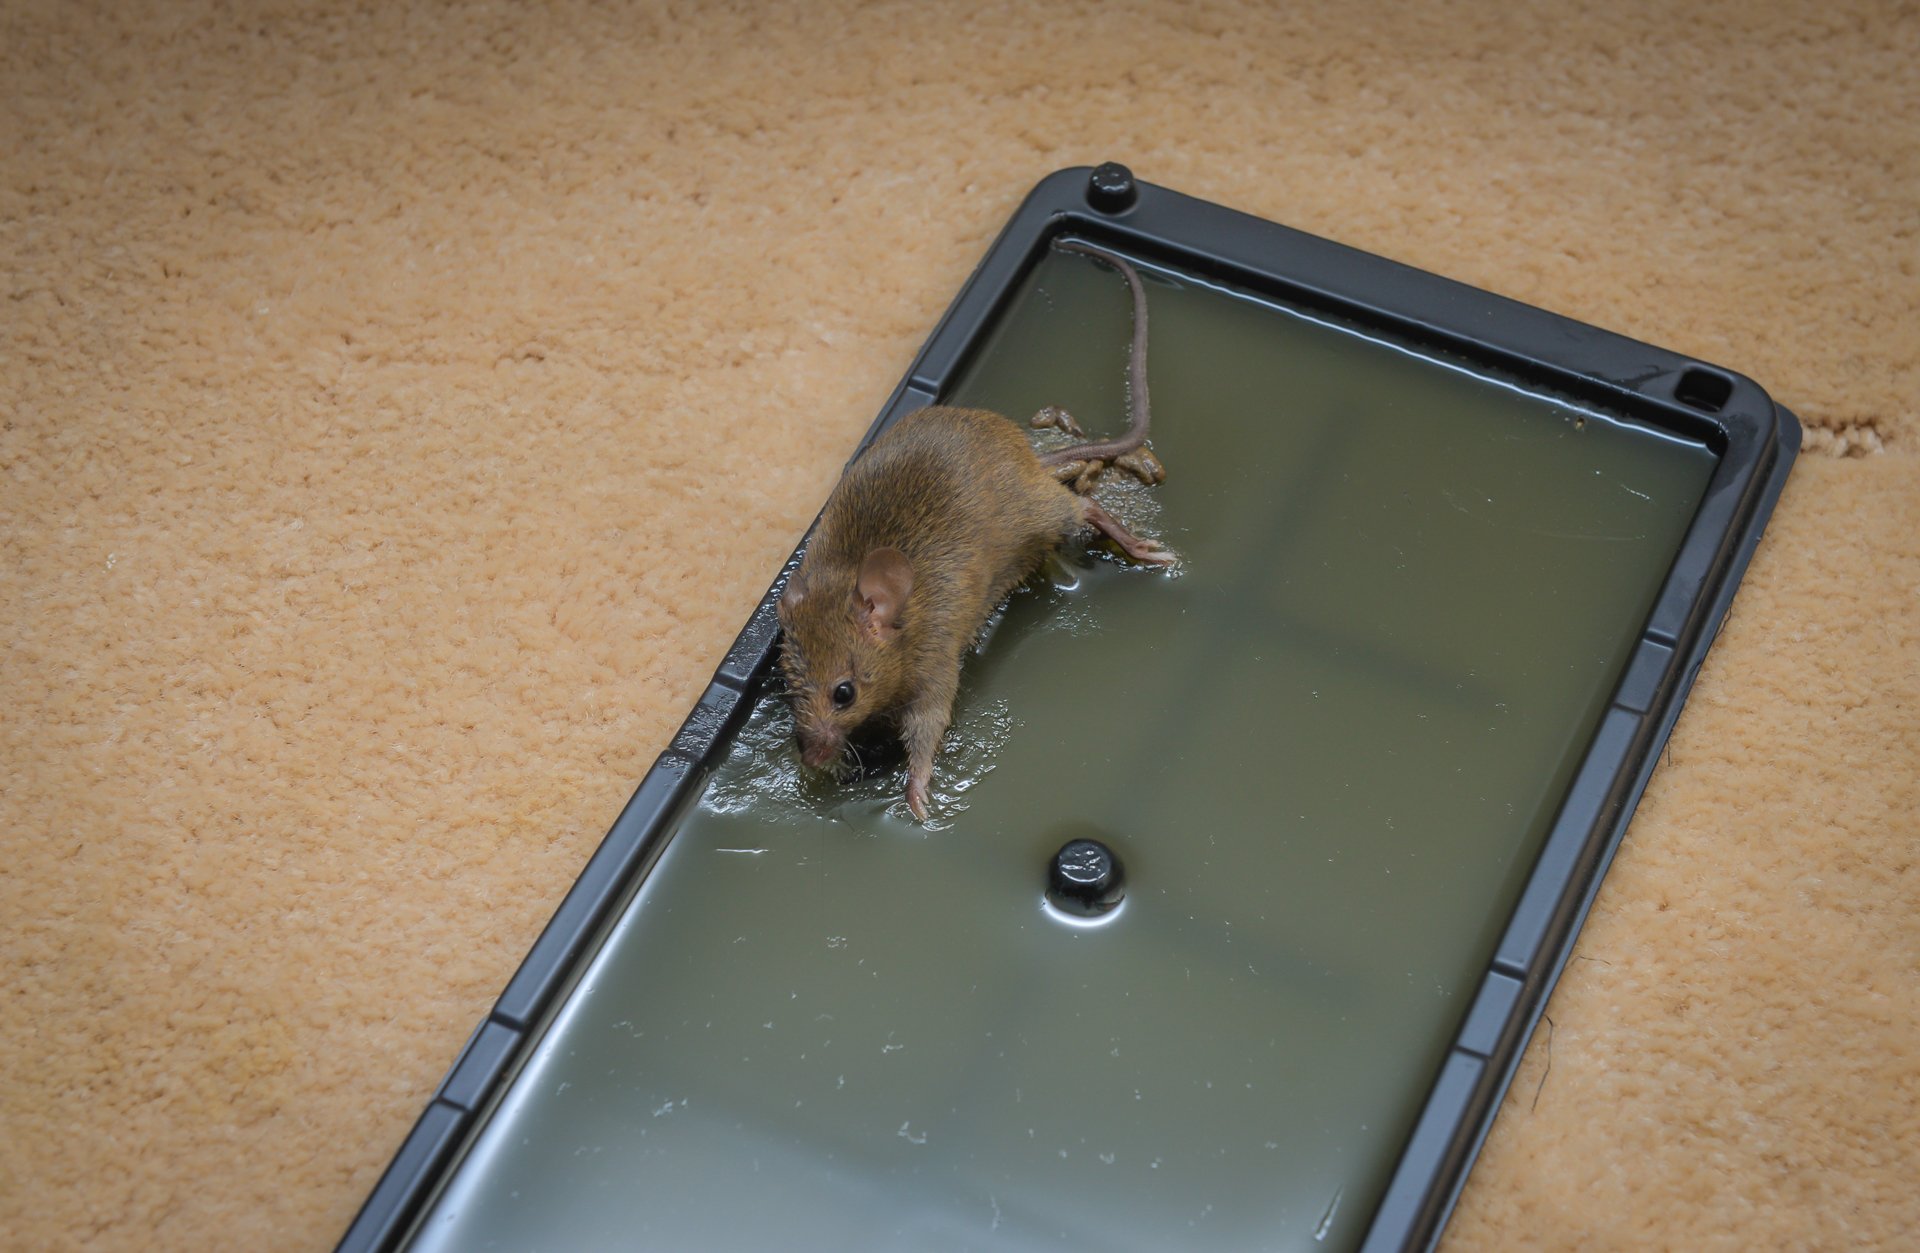 What Are Glue Traps Used For